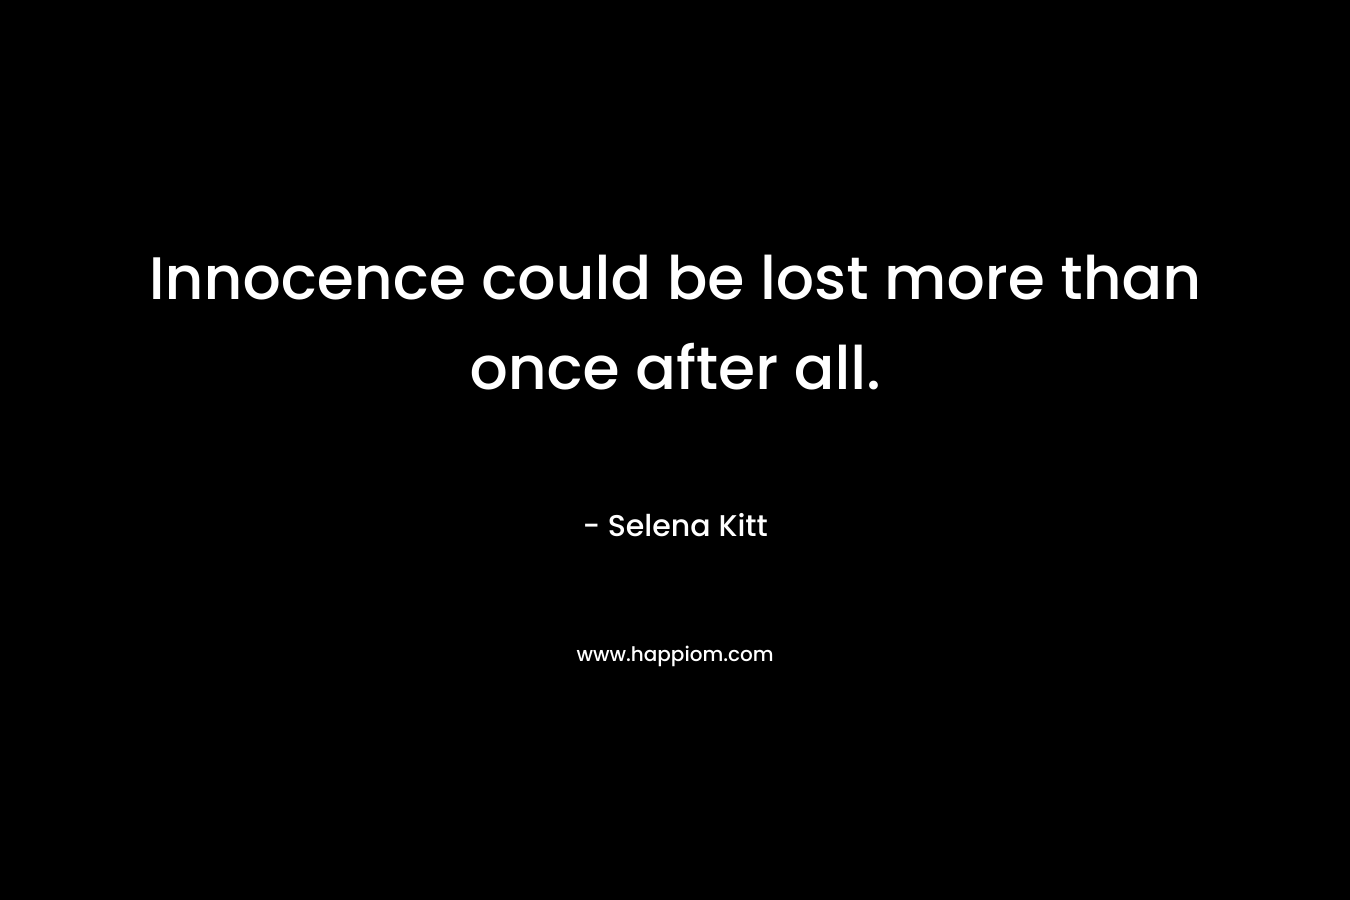 Innocence could be lost more than once after all.